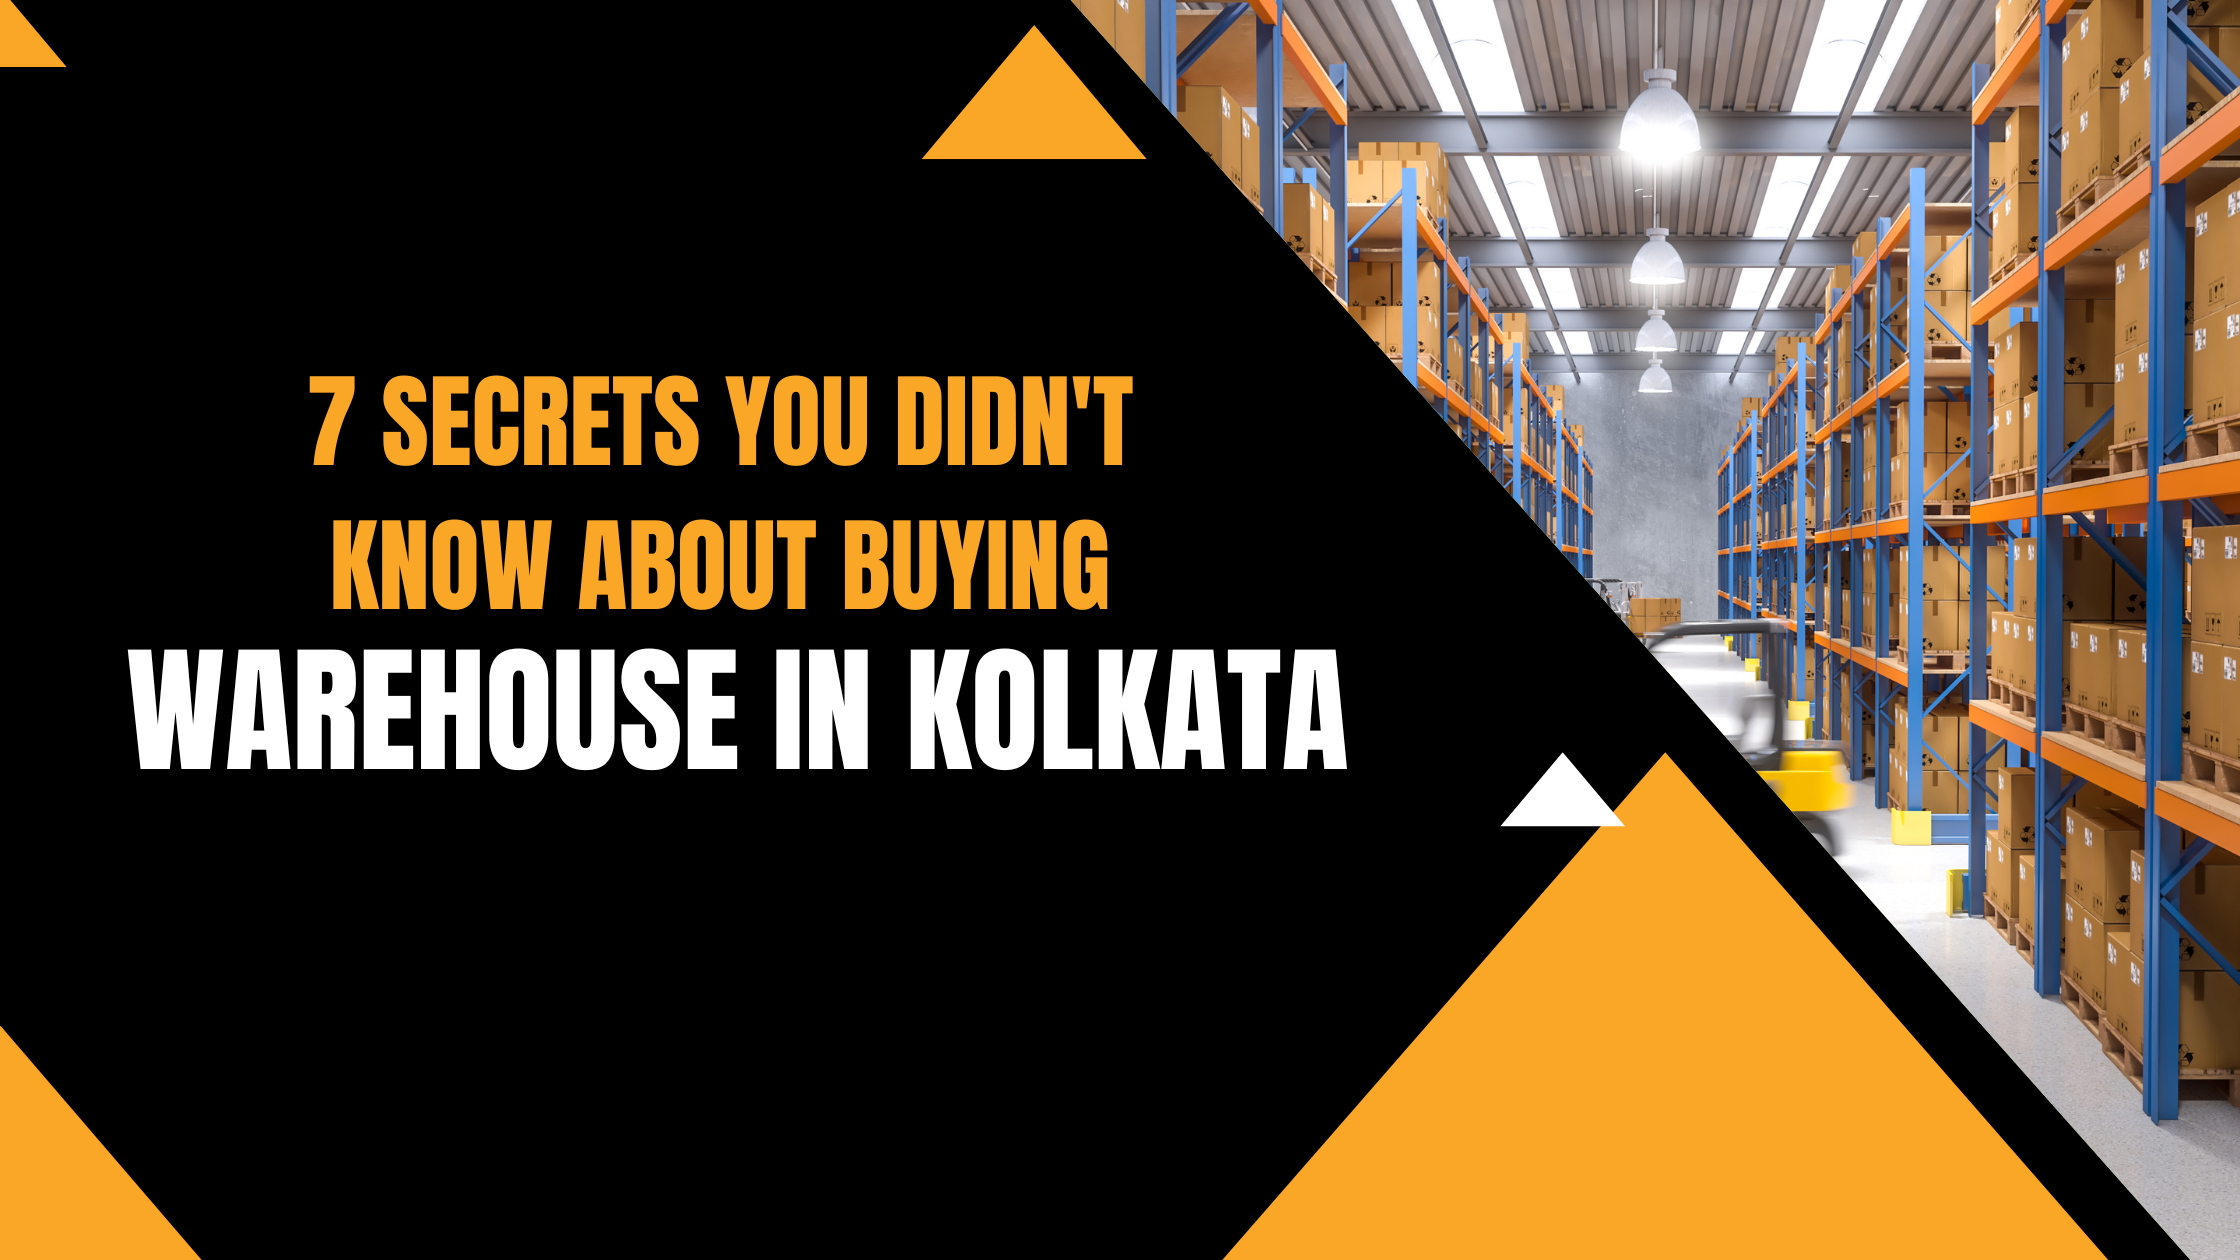 7 Secrets You Didn’t Know About Buying Warehouse In Kolkata